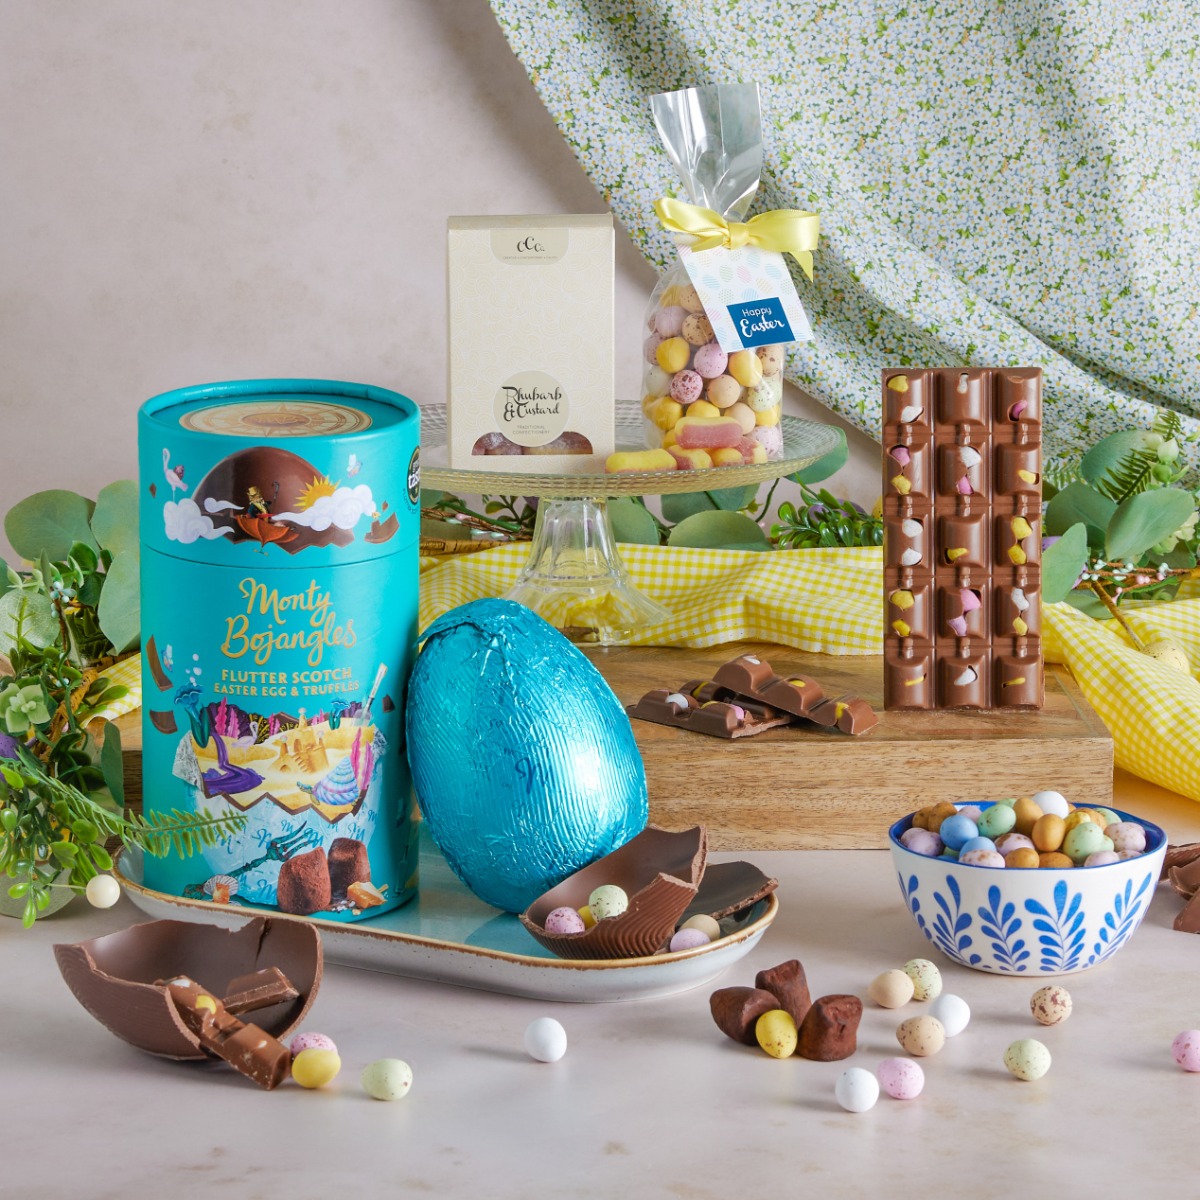 Easter Egg Gift Box with chocolate eggs on display